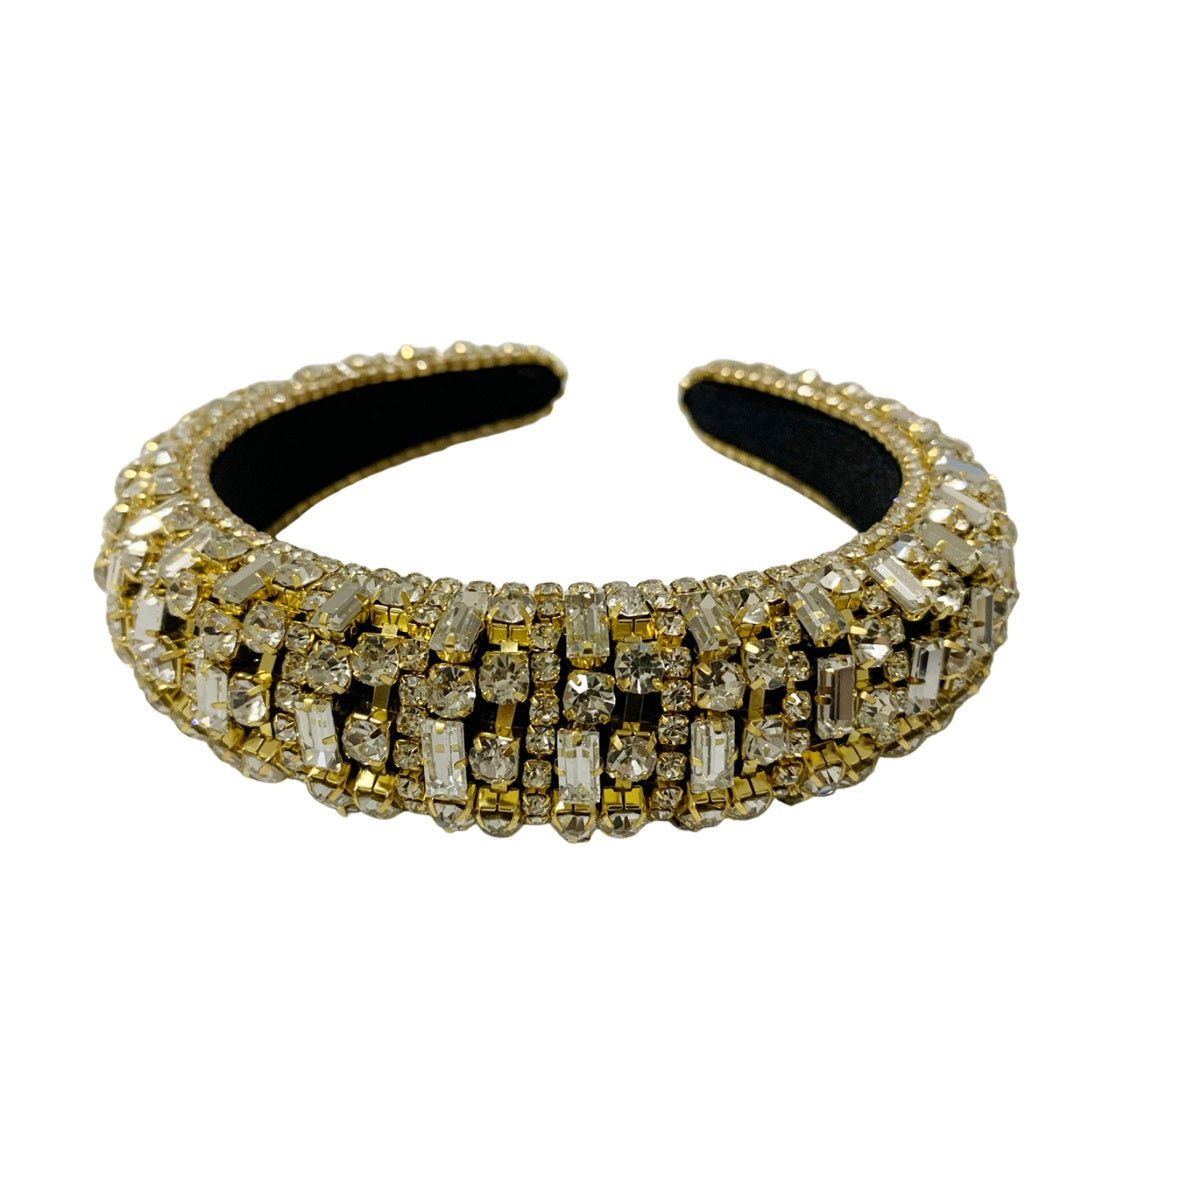 Mia Beauty Royal Elevated Headband in yellow gold  metal and clear stones